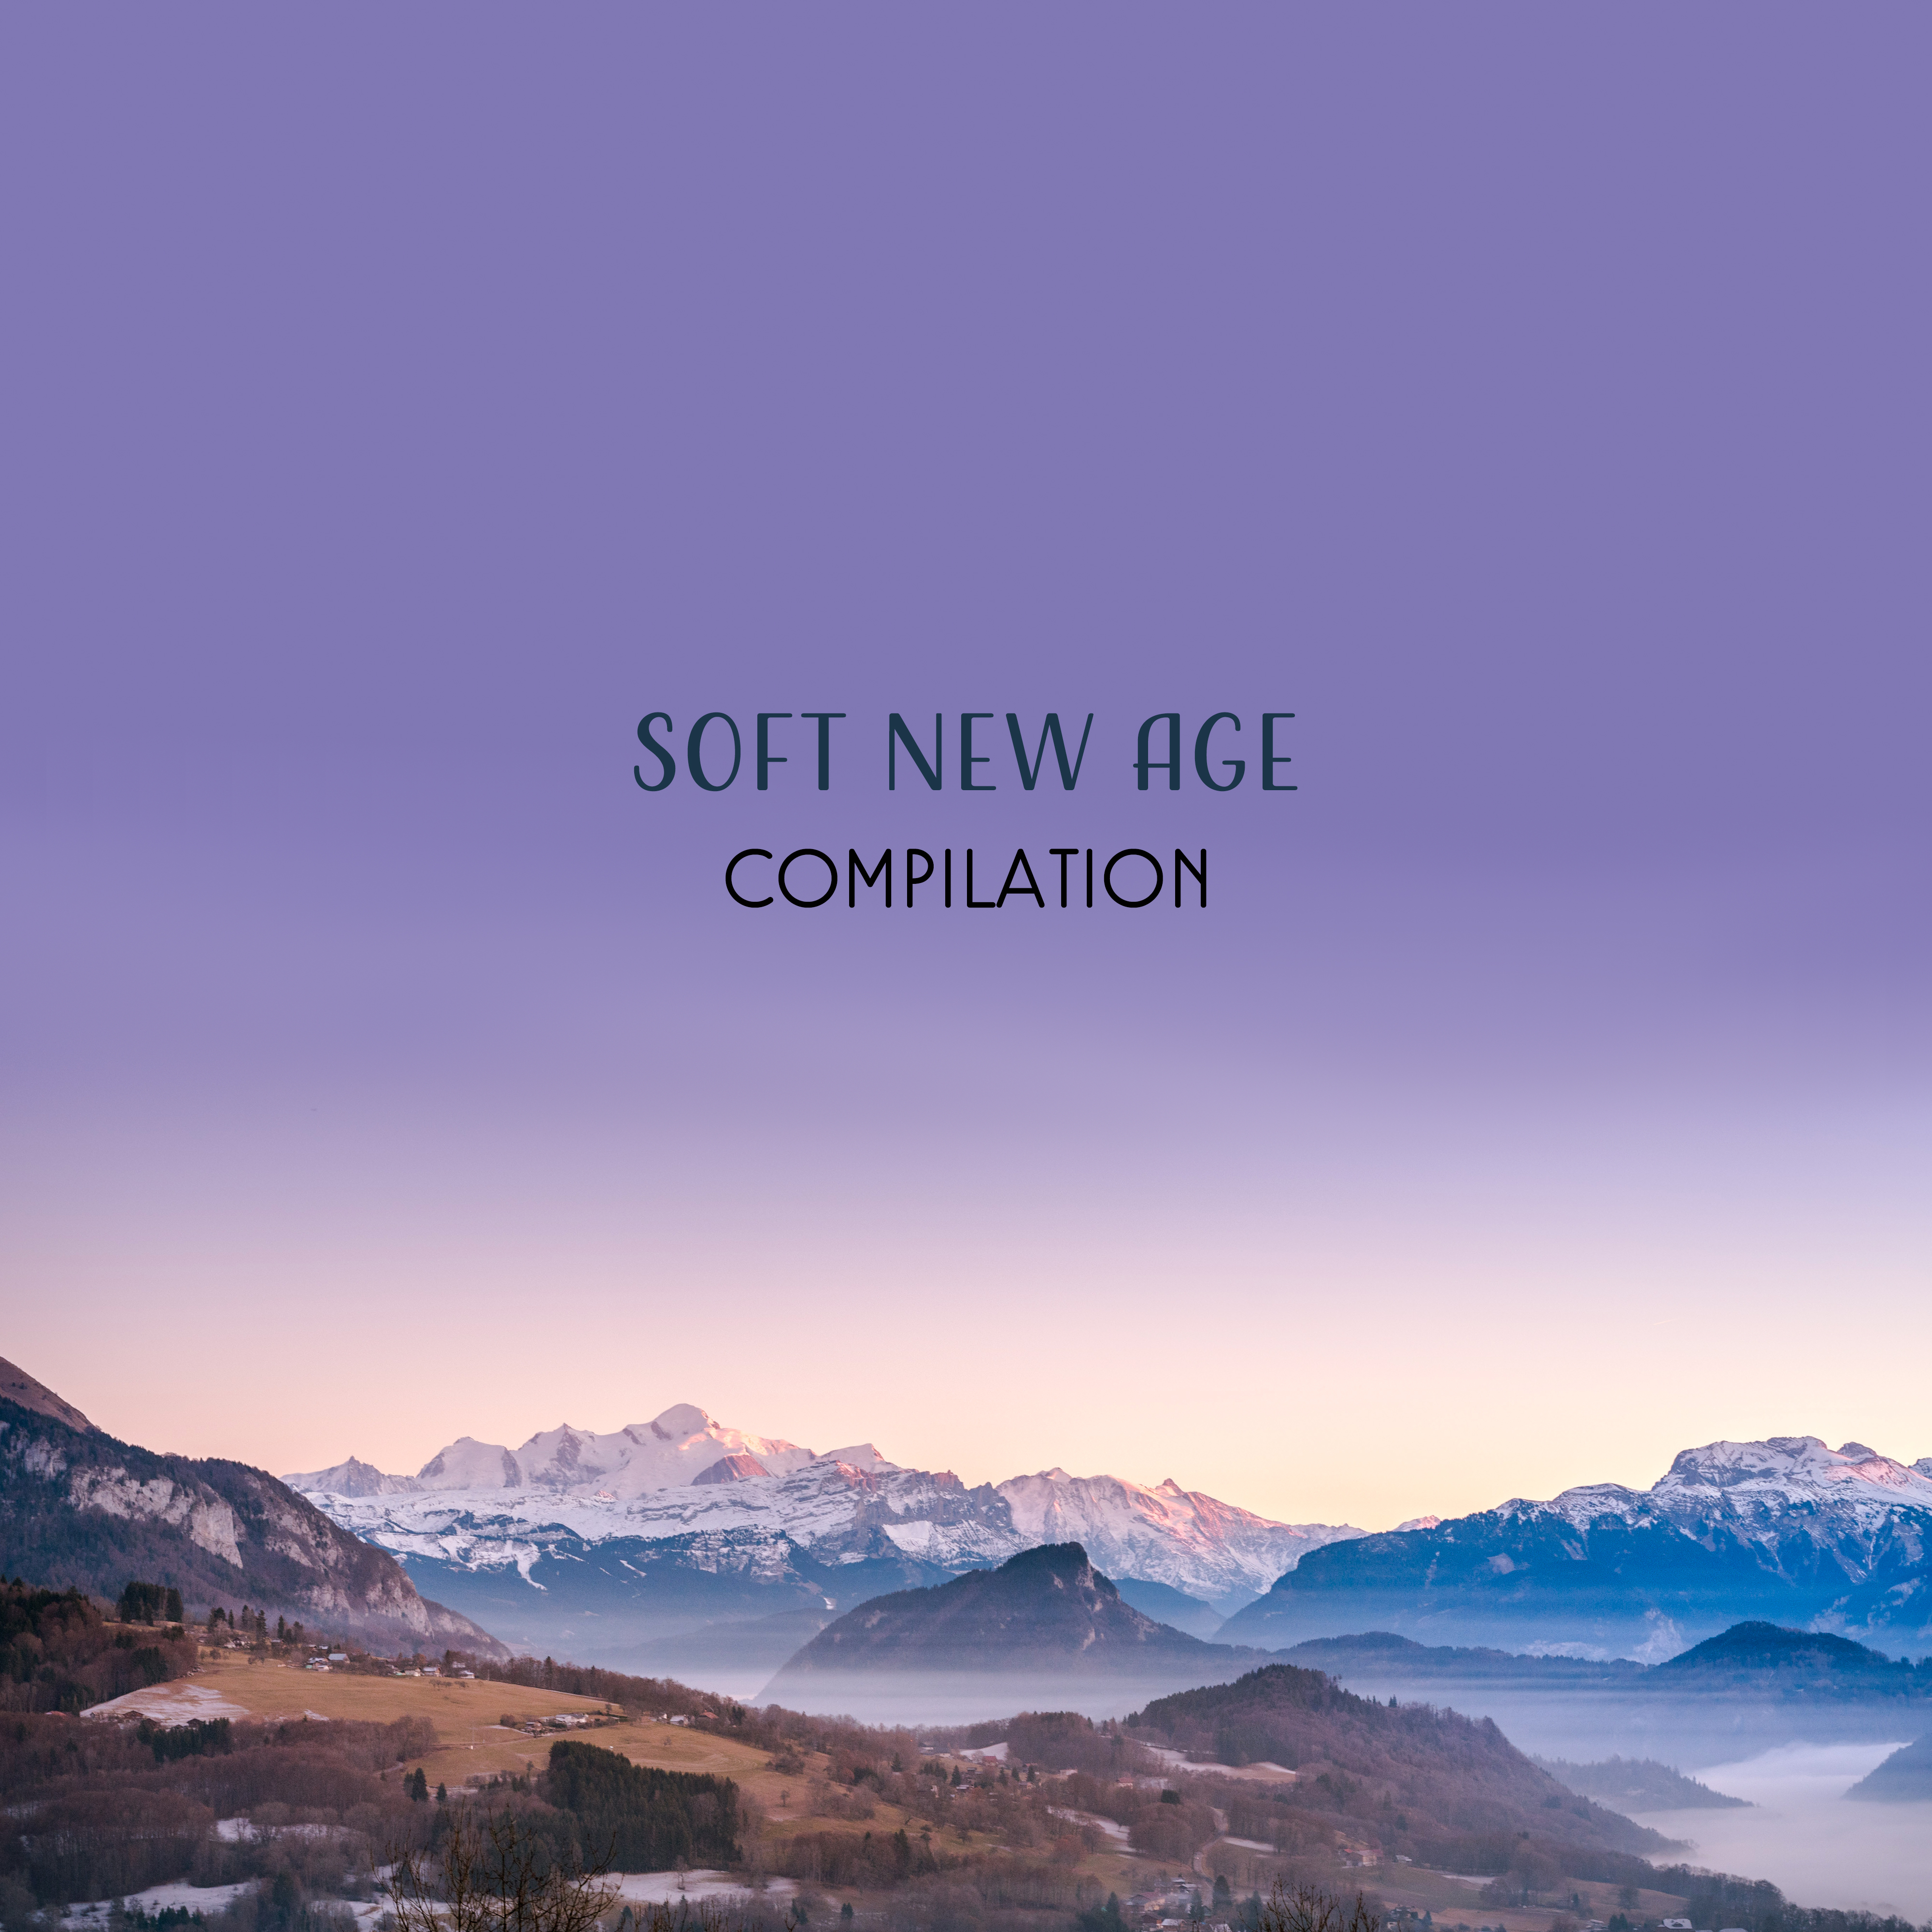 Soft New Age Compilation – Music for Spa, Relaxation, Massage, Therapy, Nature Sounds